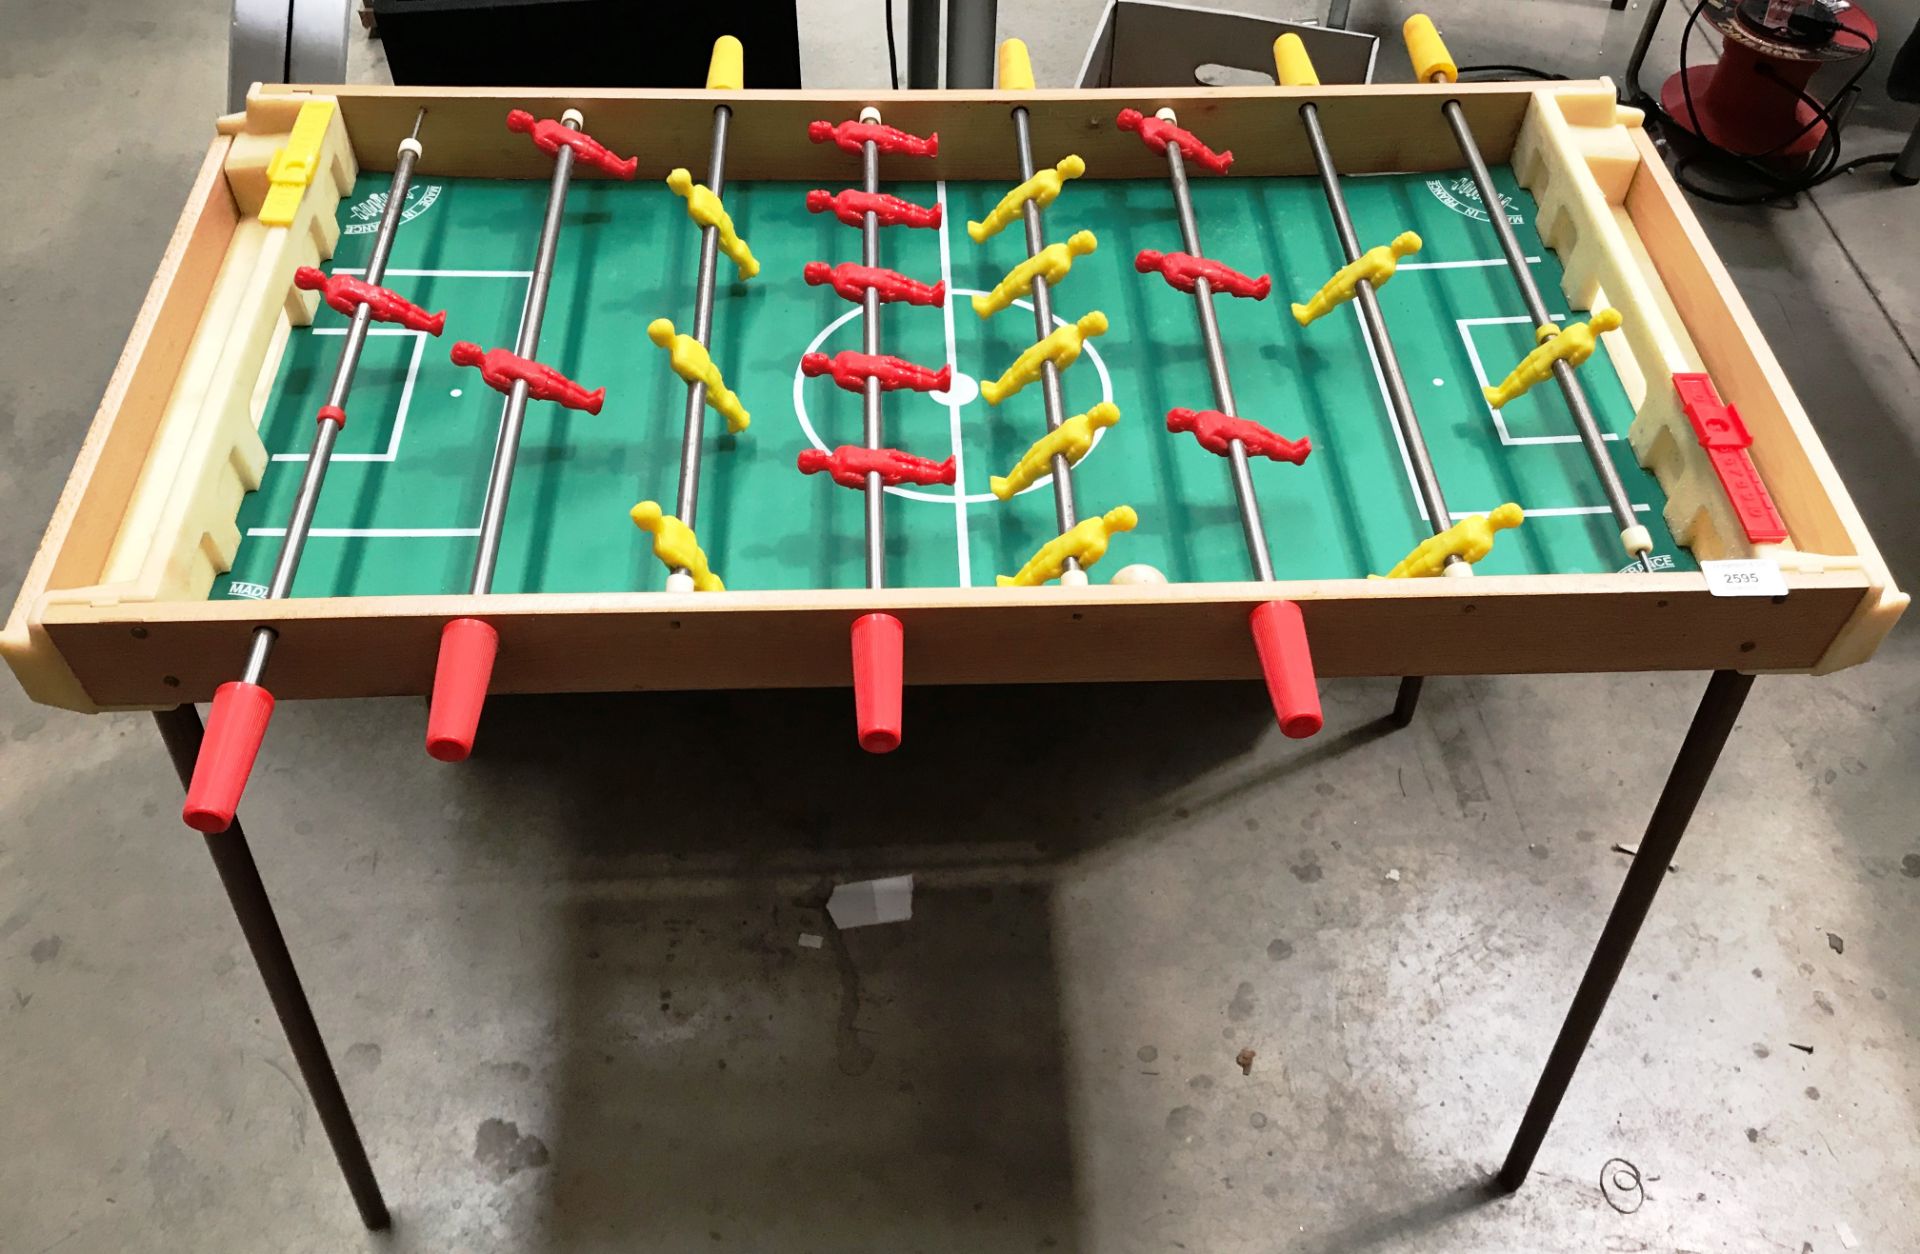 A Charton Super Jouet table football game on legs - in play worn box